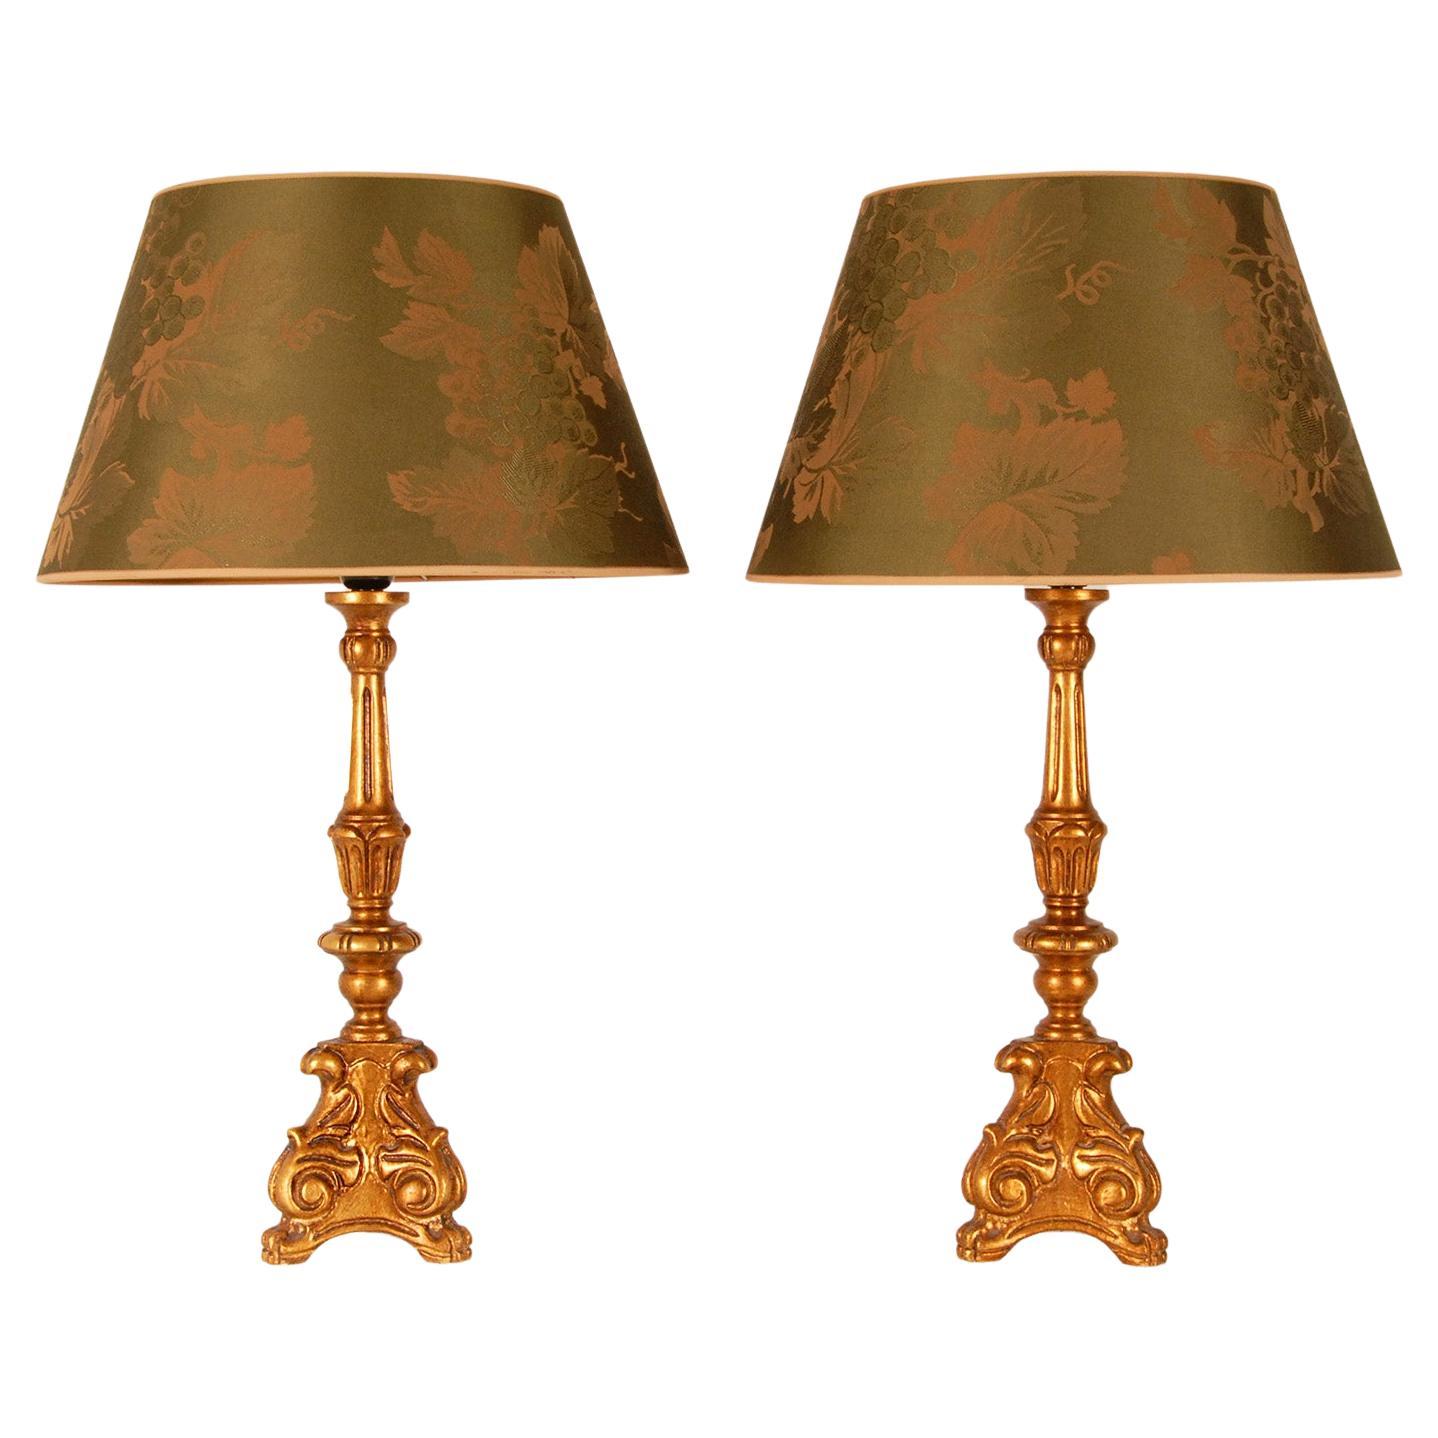 Vintage French Country Style Gold Giltwood Green Baroque Table Lamps, a Pair